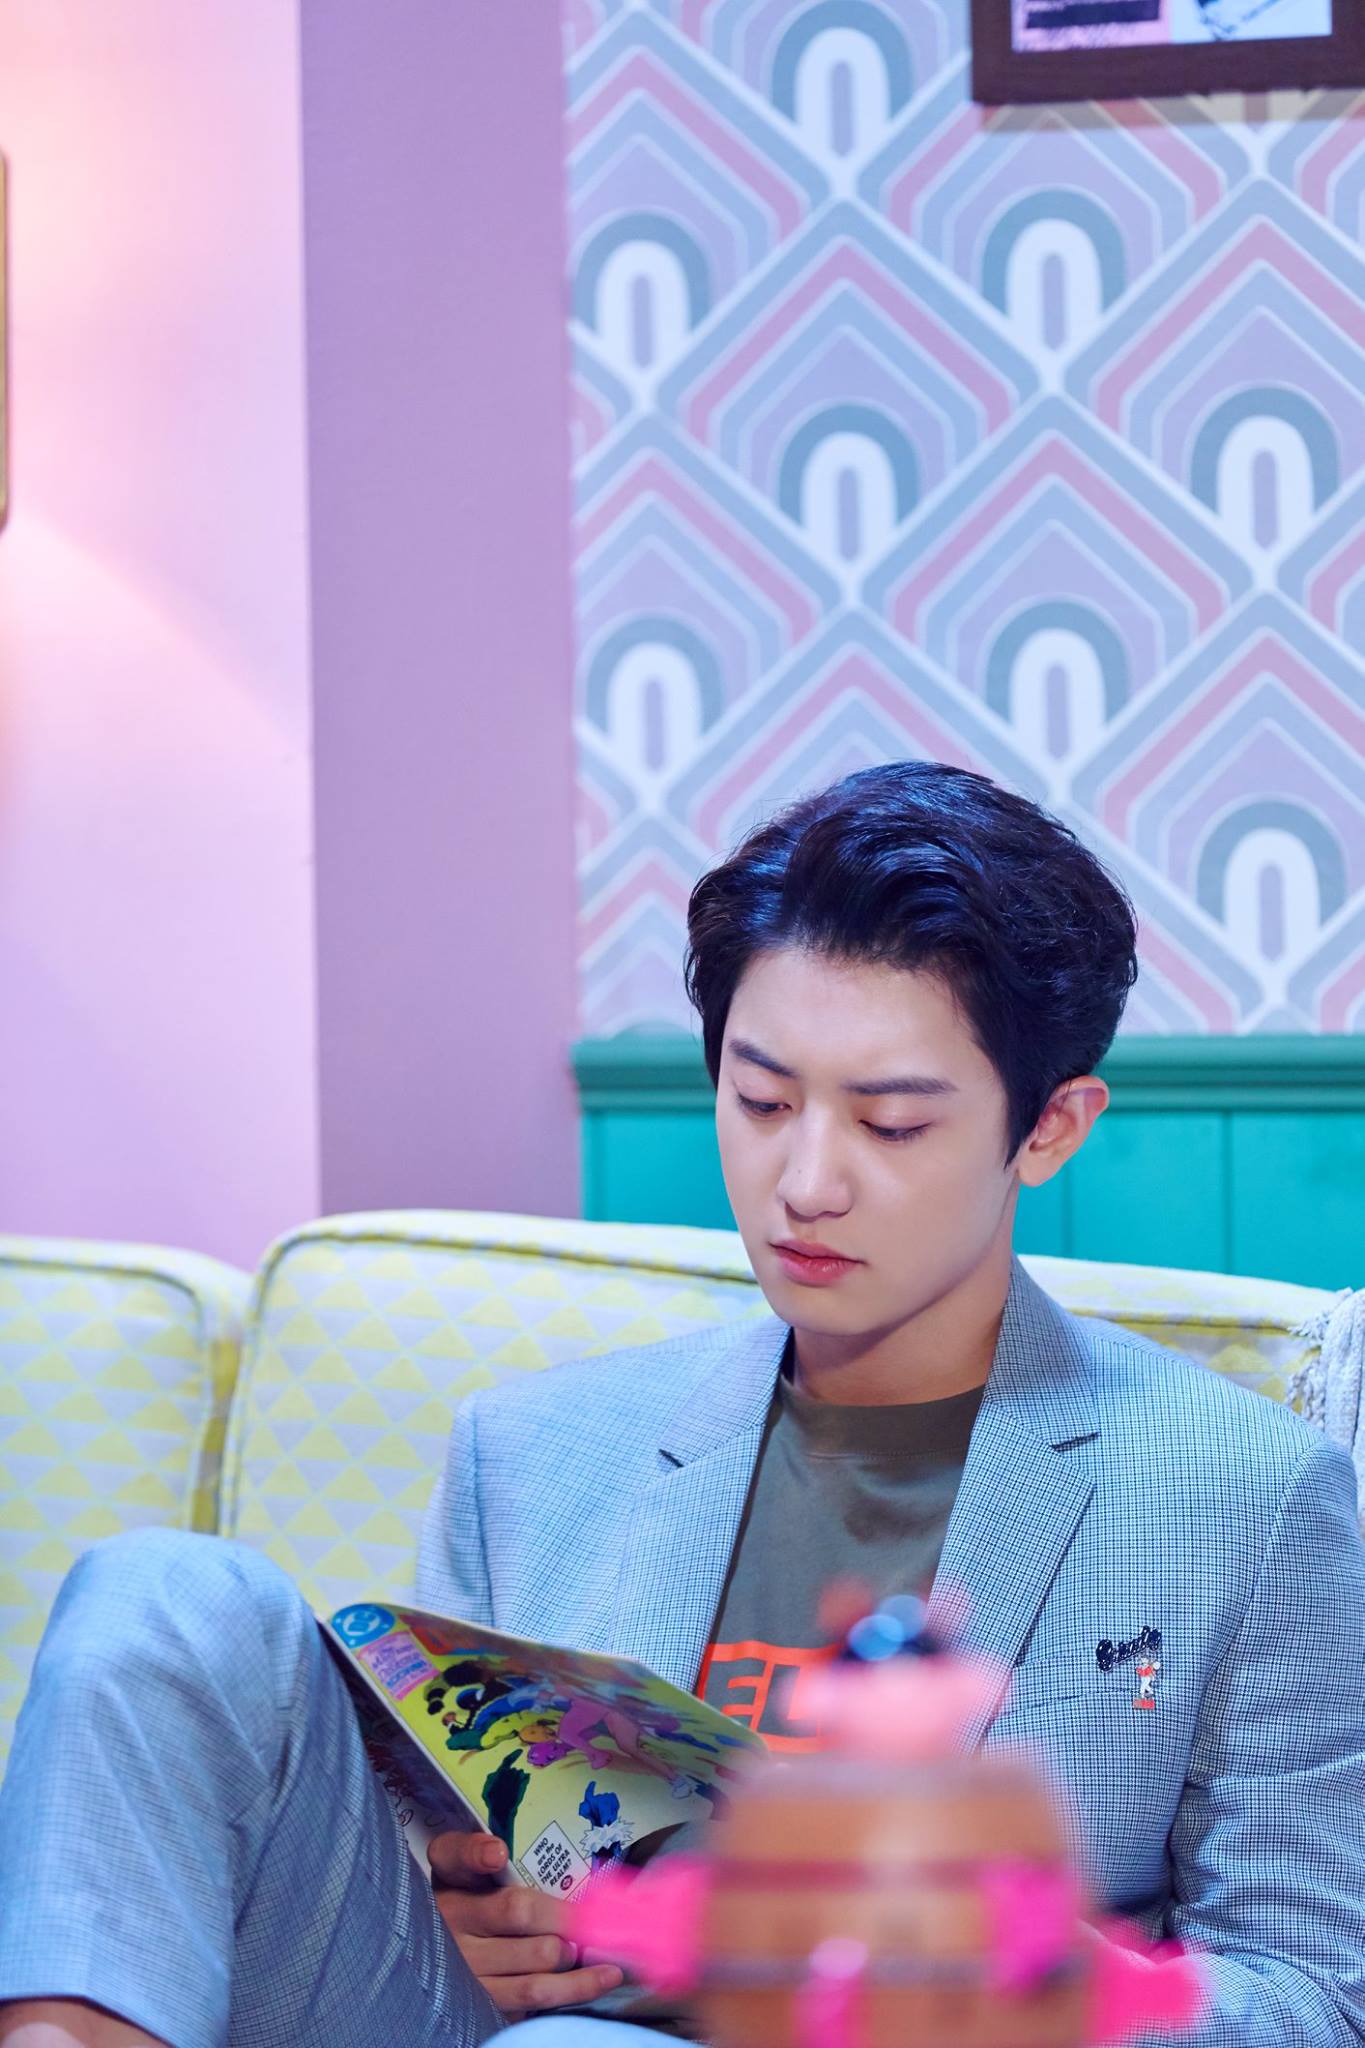 Update: EXO's Chanyeol And Sehun Star In MV Teaser For “We Young